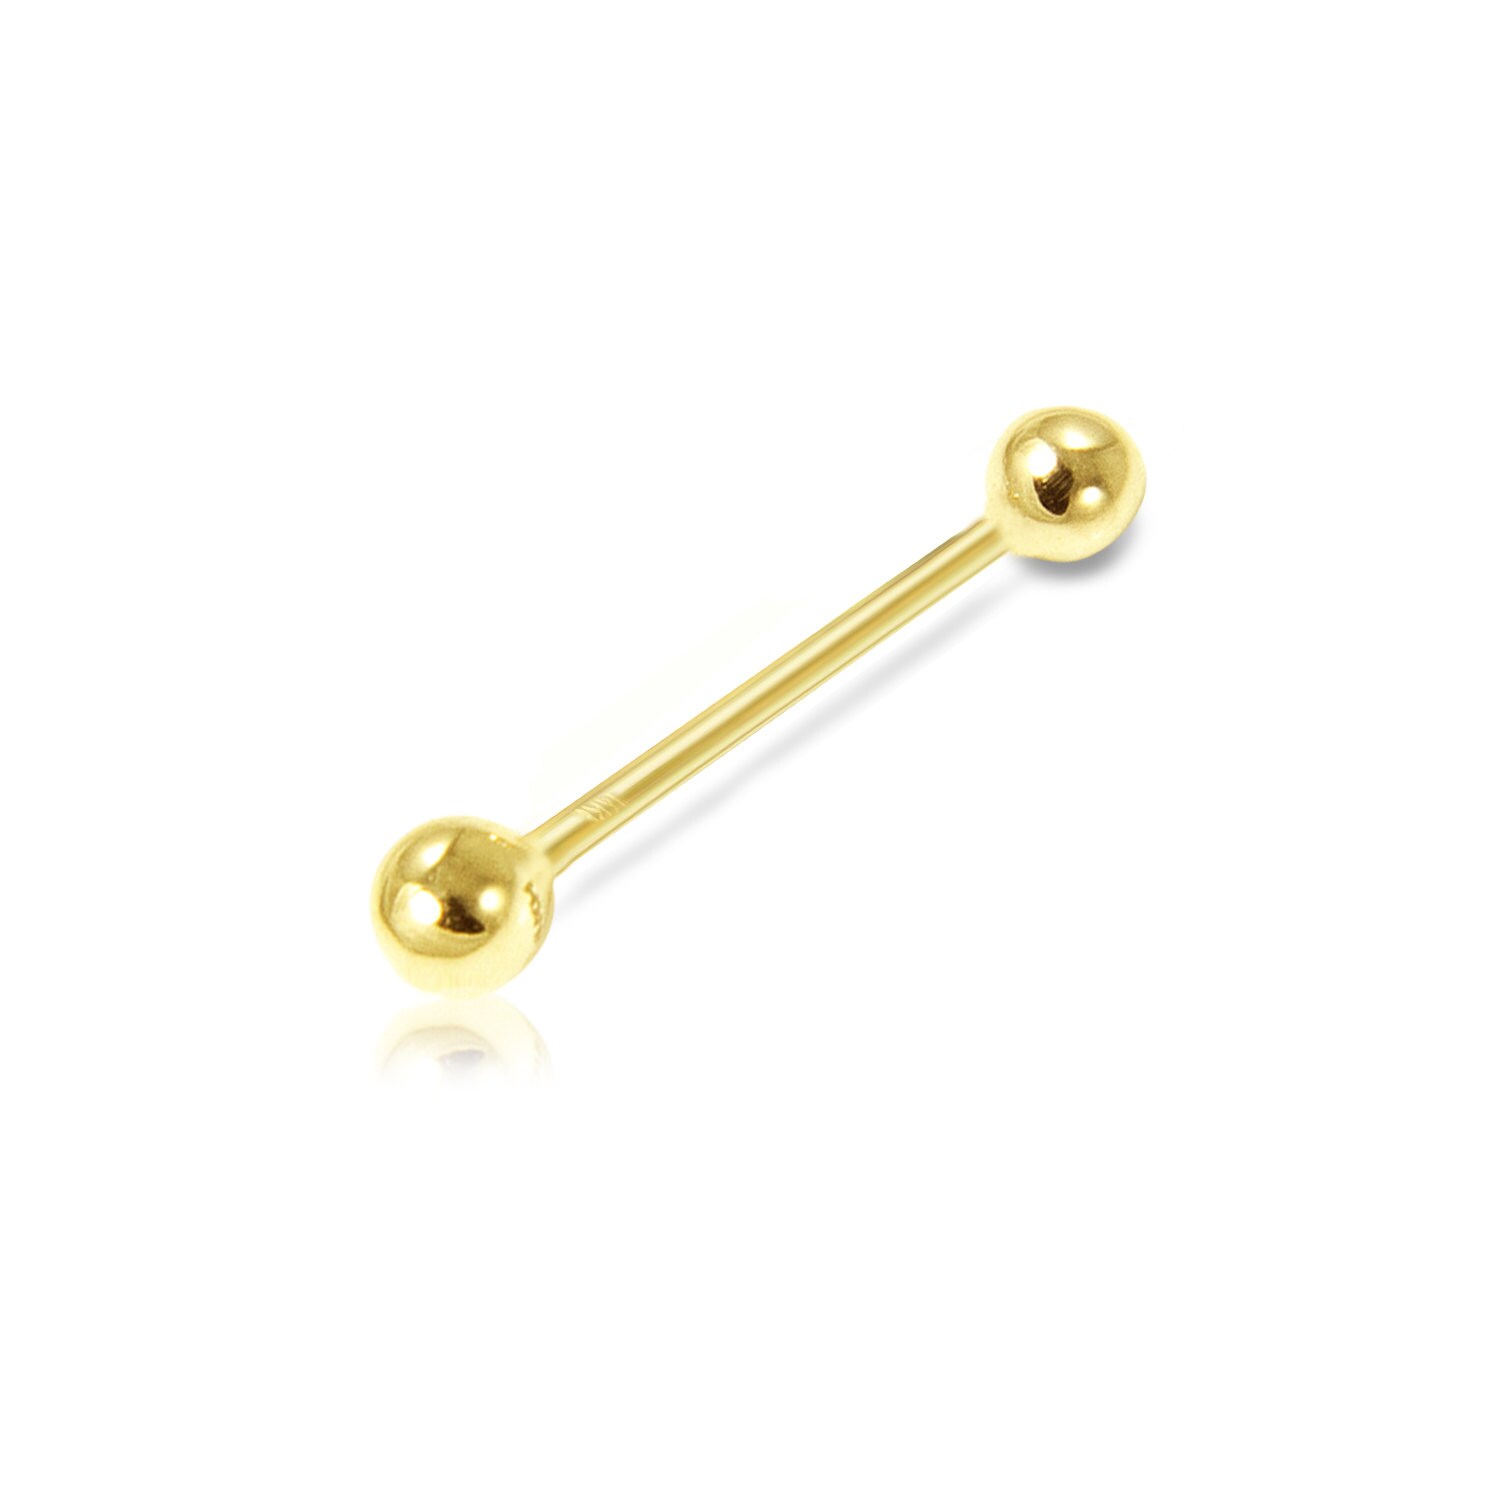 Nipple Ring Tongue Barbell One Gold Solid Yellow Gold 14K 14G 12MM Bar Jewelry 